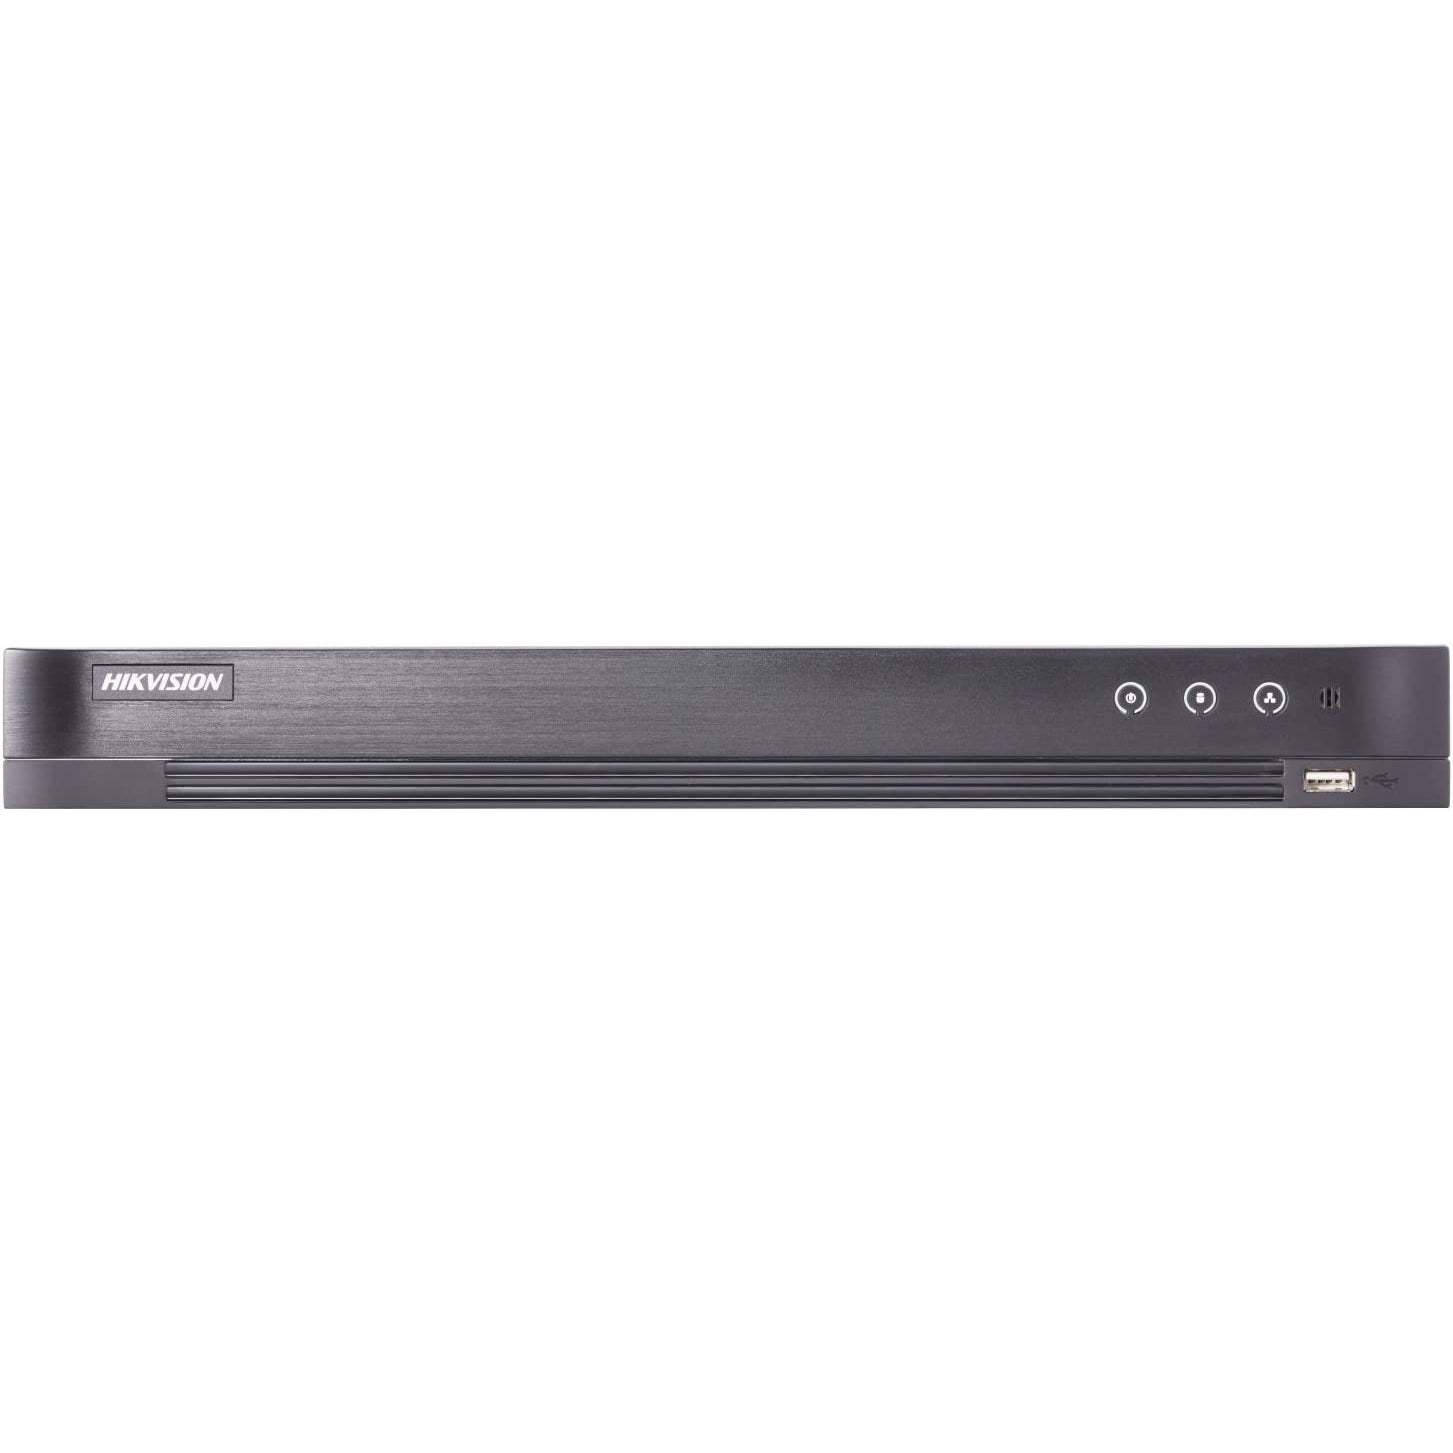 Hikvision DS-7200 Series Turbo HD DVR